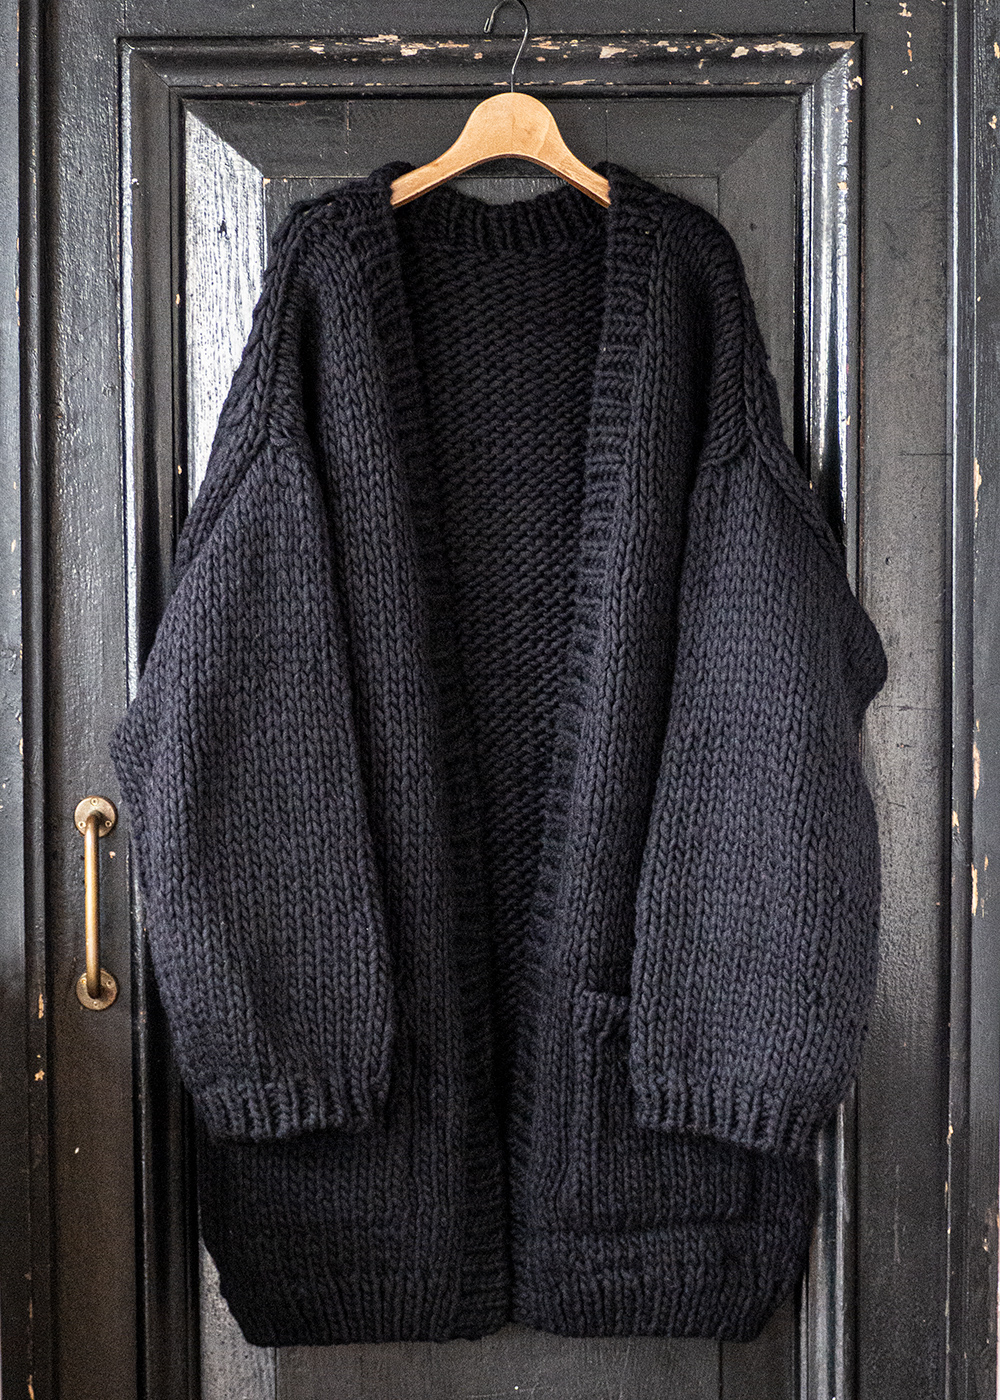 ONE FITS ALL PERUVIAN KNIT｜nest Robe / CONFECT ONLINE SHOP